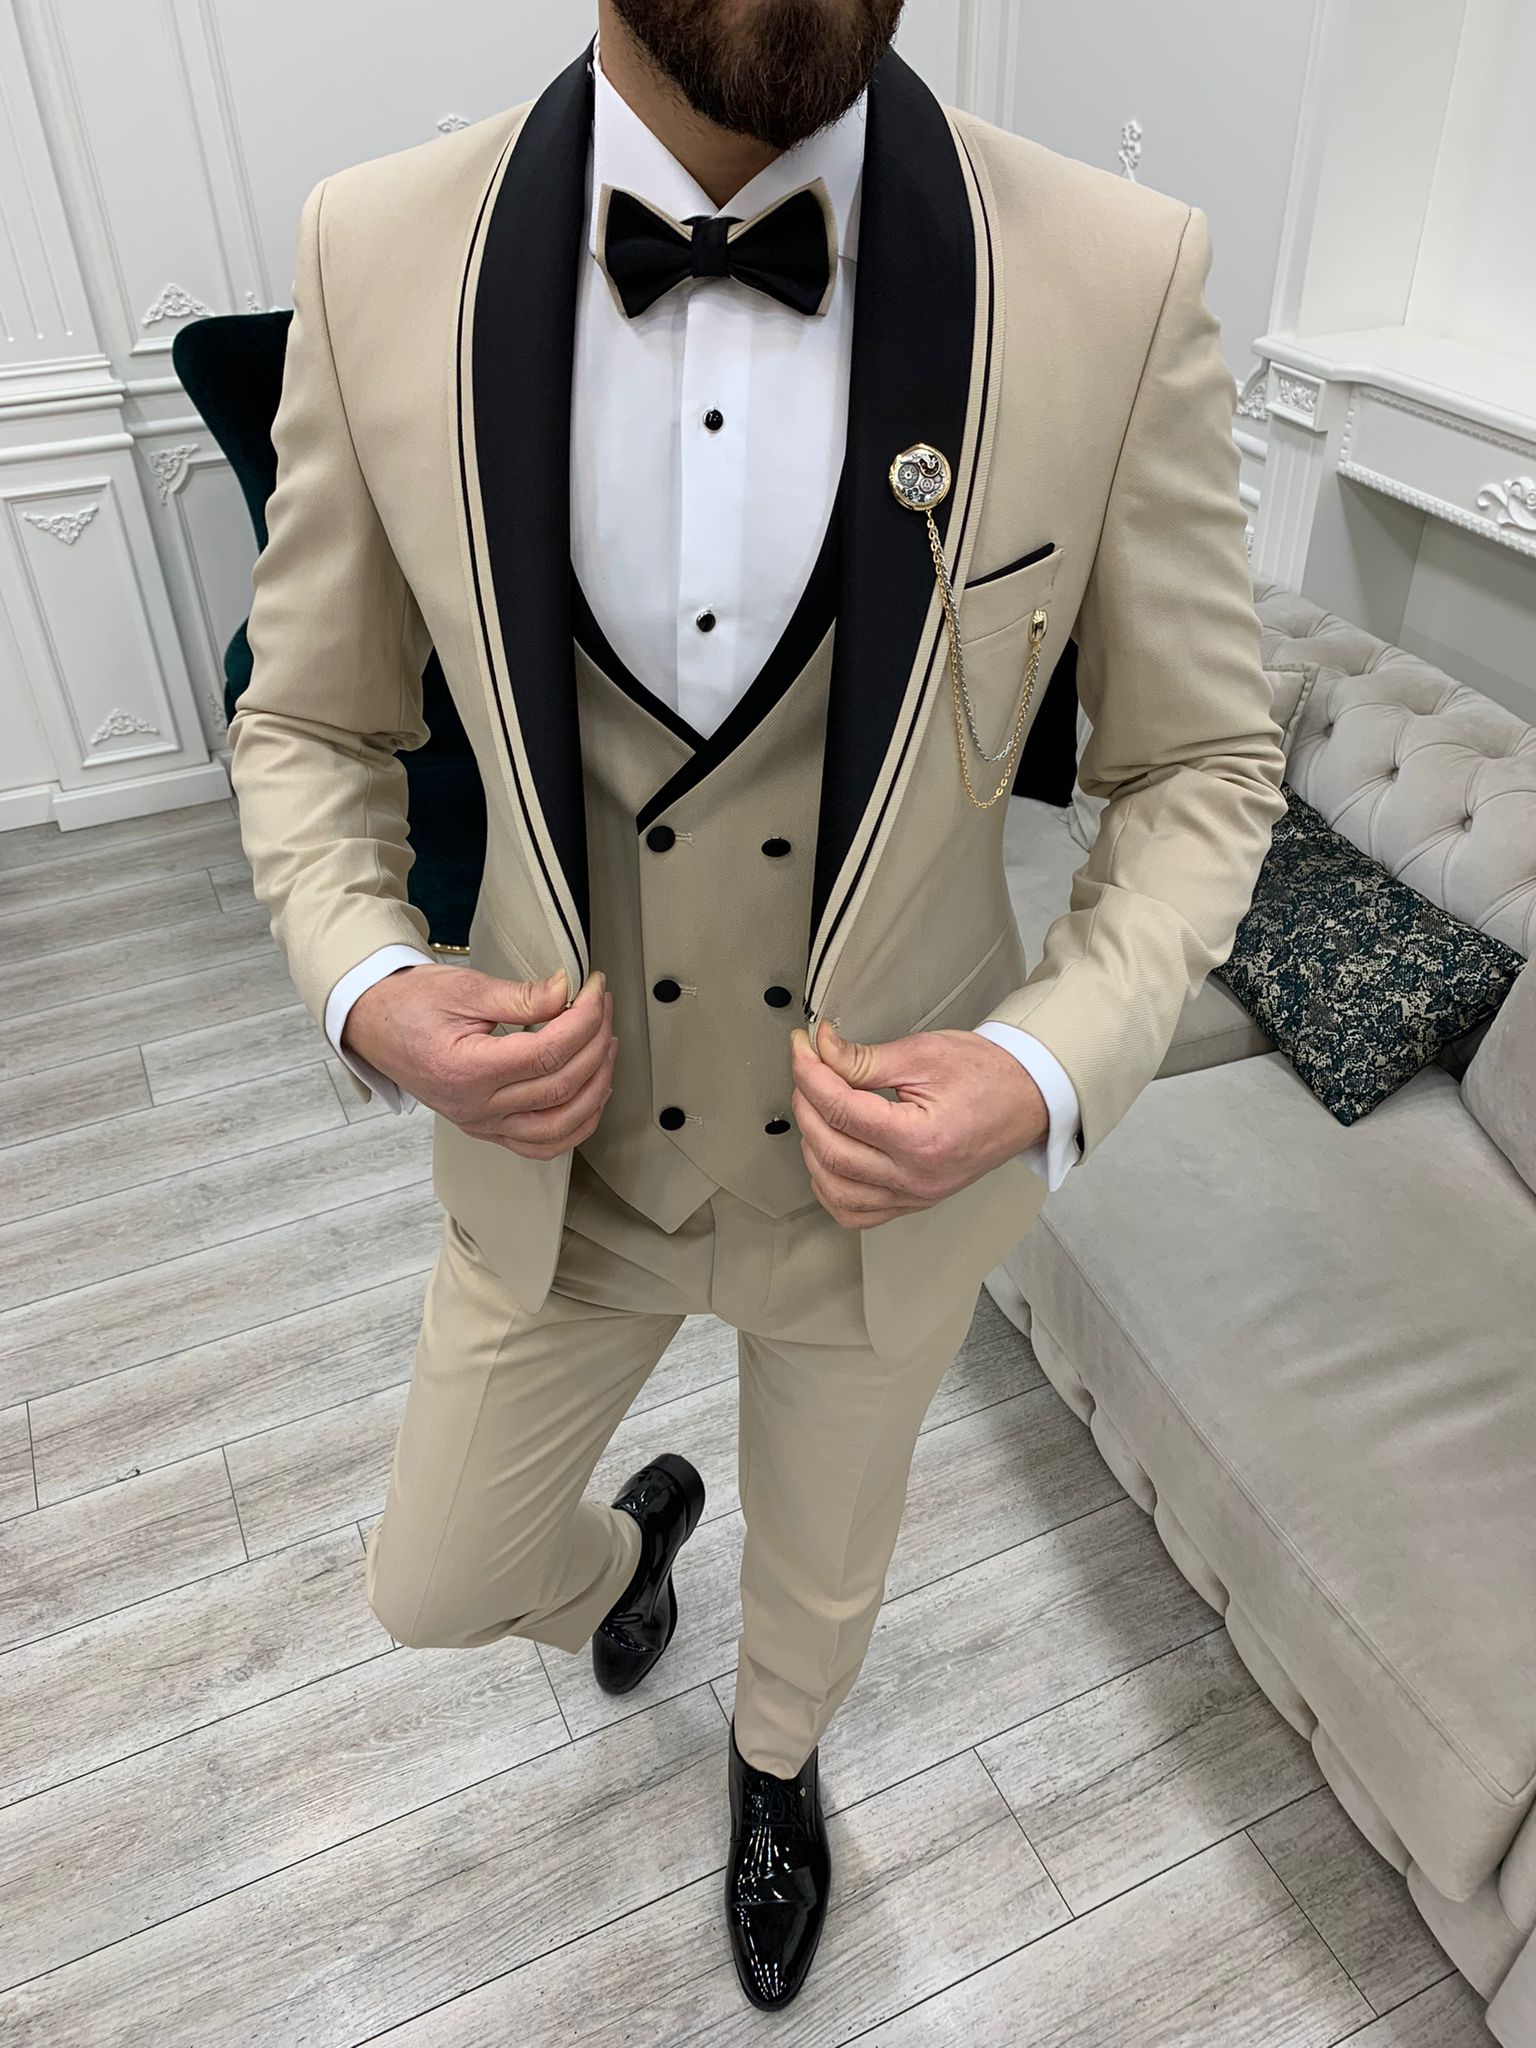 Beige Slim Fit Shawl Lapel Tuxedo Wedding Suit for Men by GentWith.com with Free Worldwide Shipping